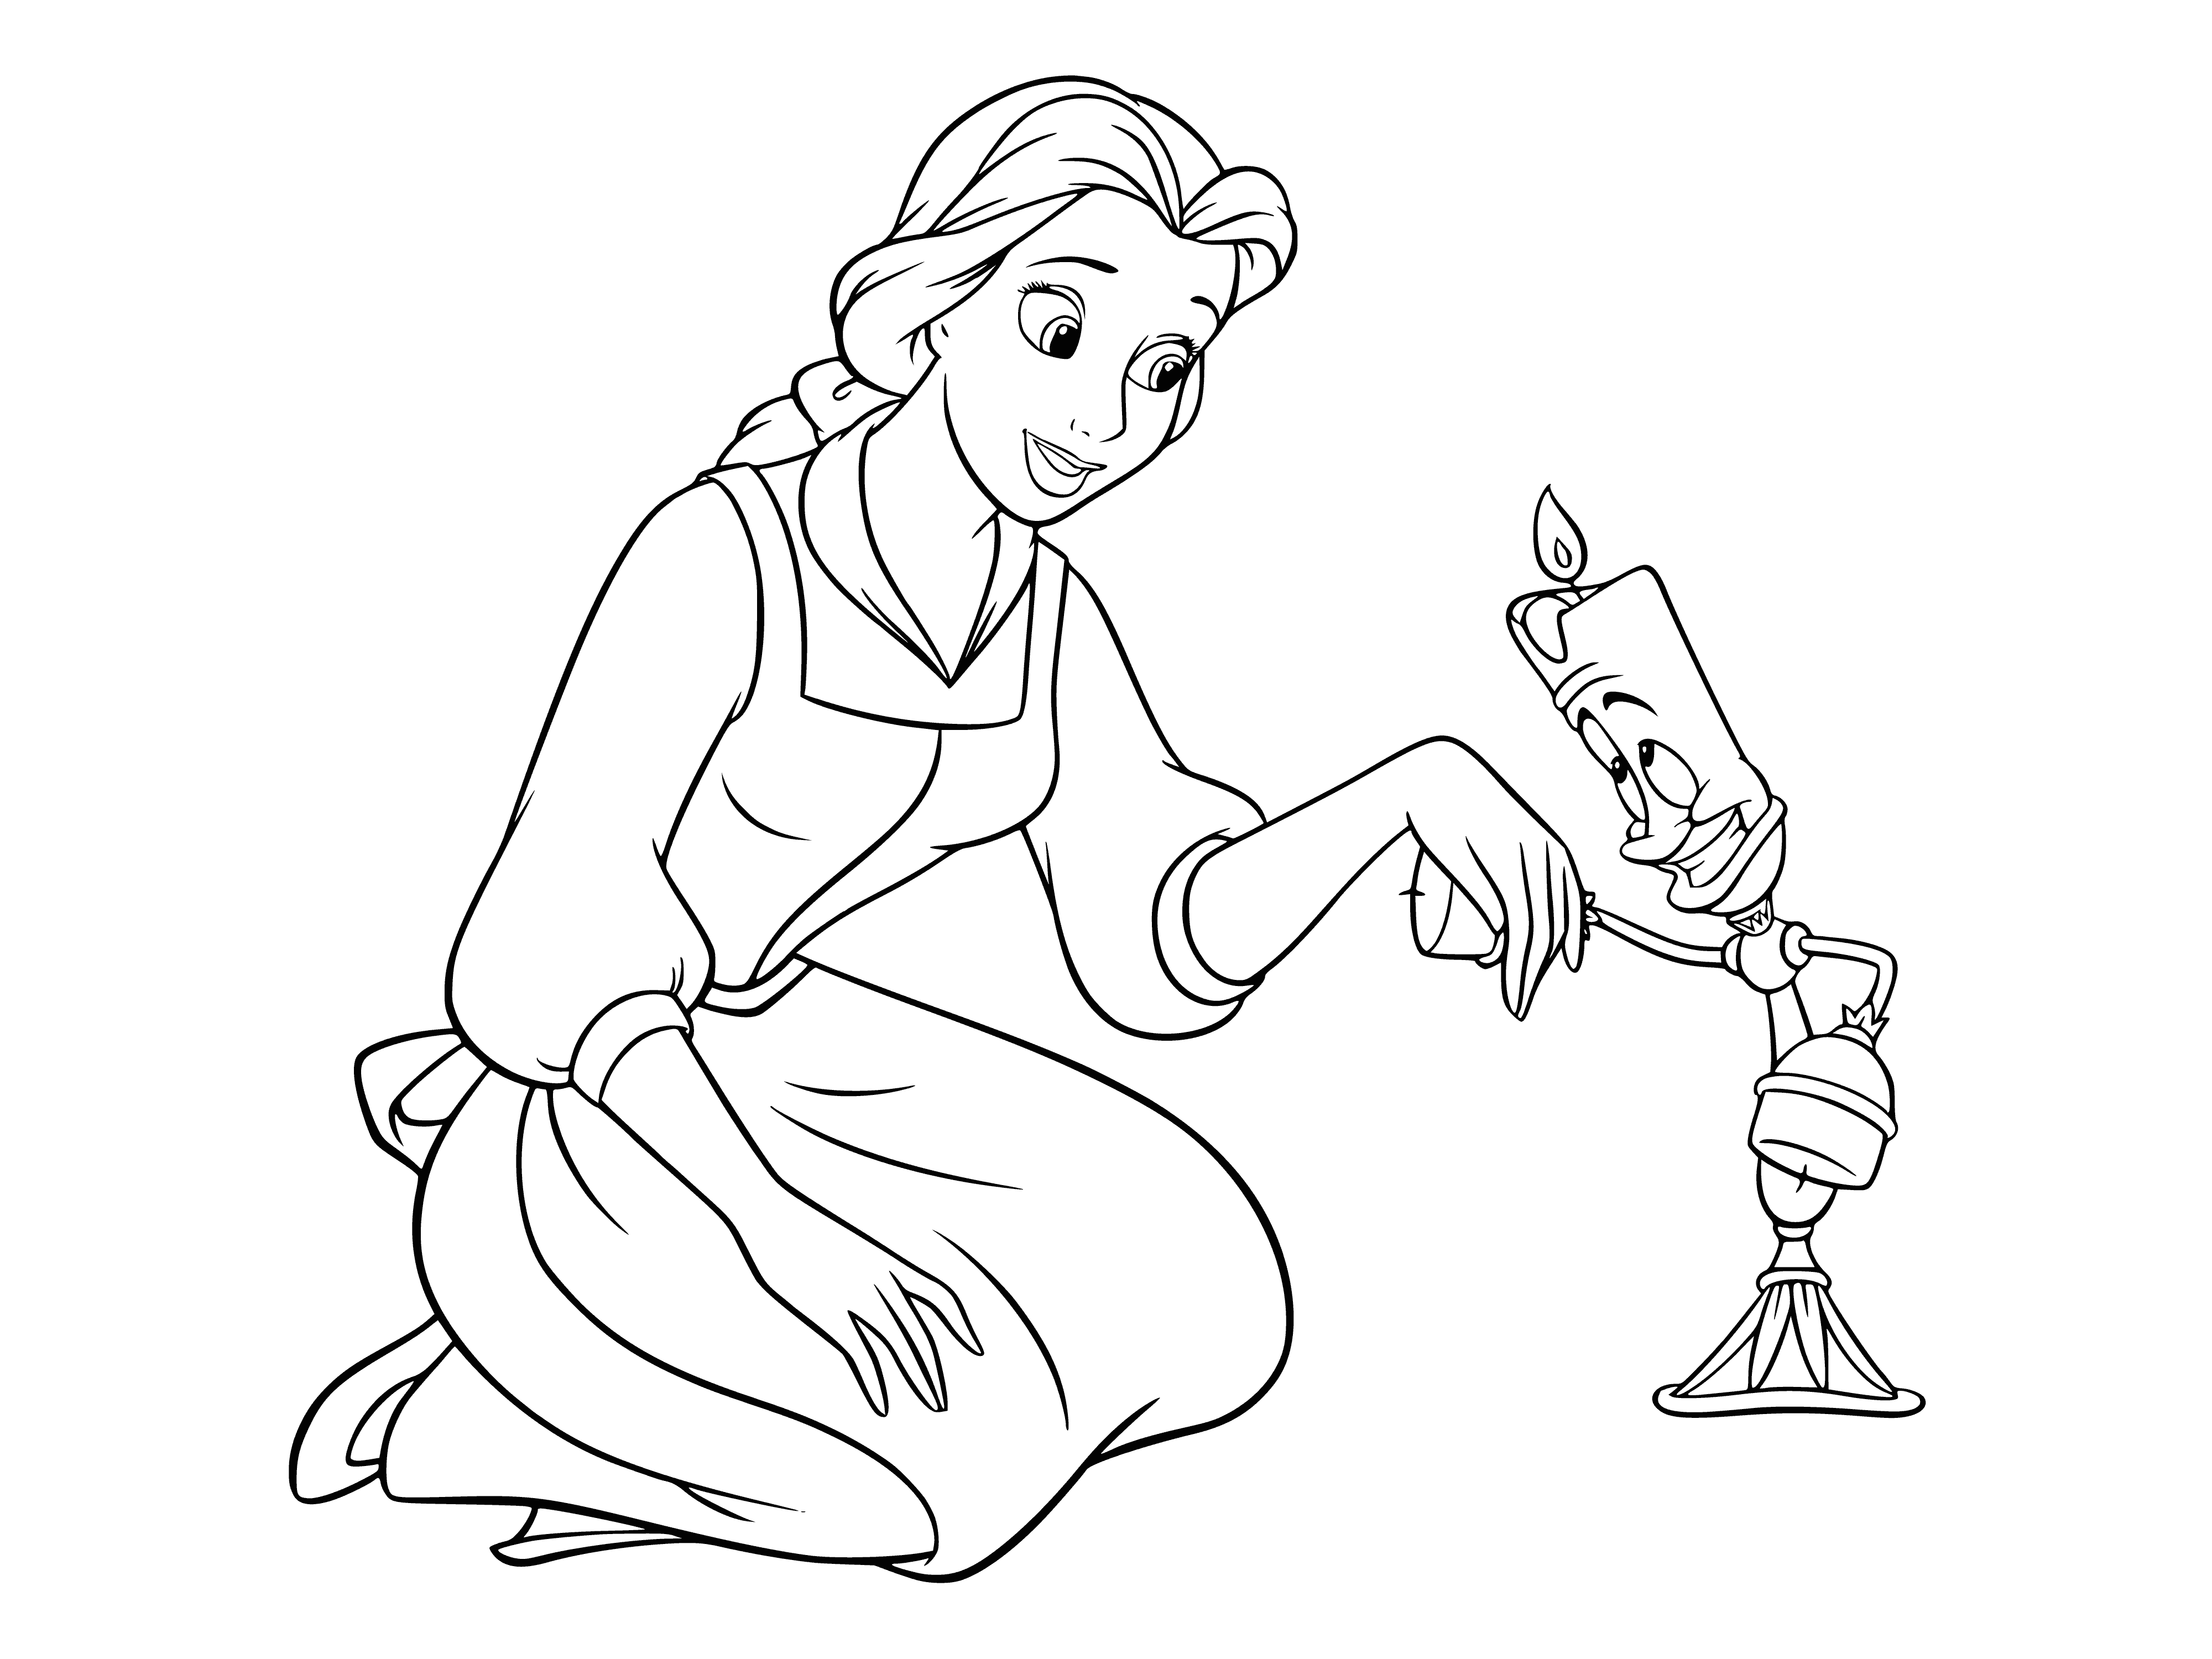 coloring page: Belle meets Lumiere, a friendly candlestick creature, transformed by a curse. They quickly become friends. #BeautyAndTheBeast